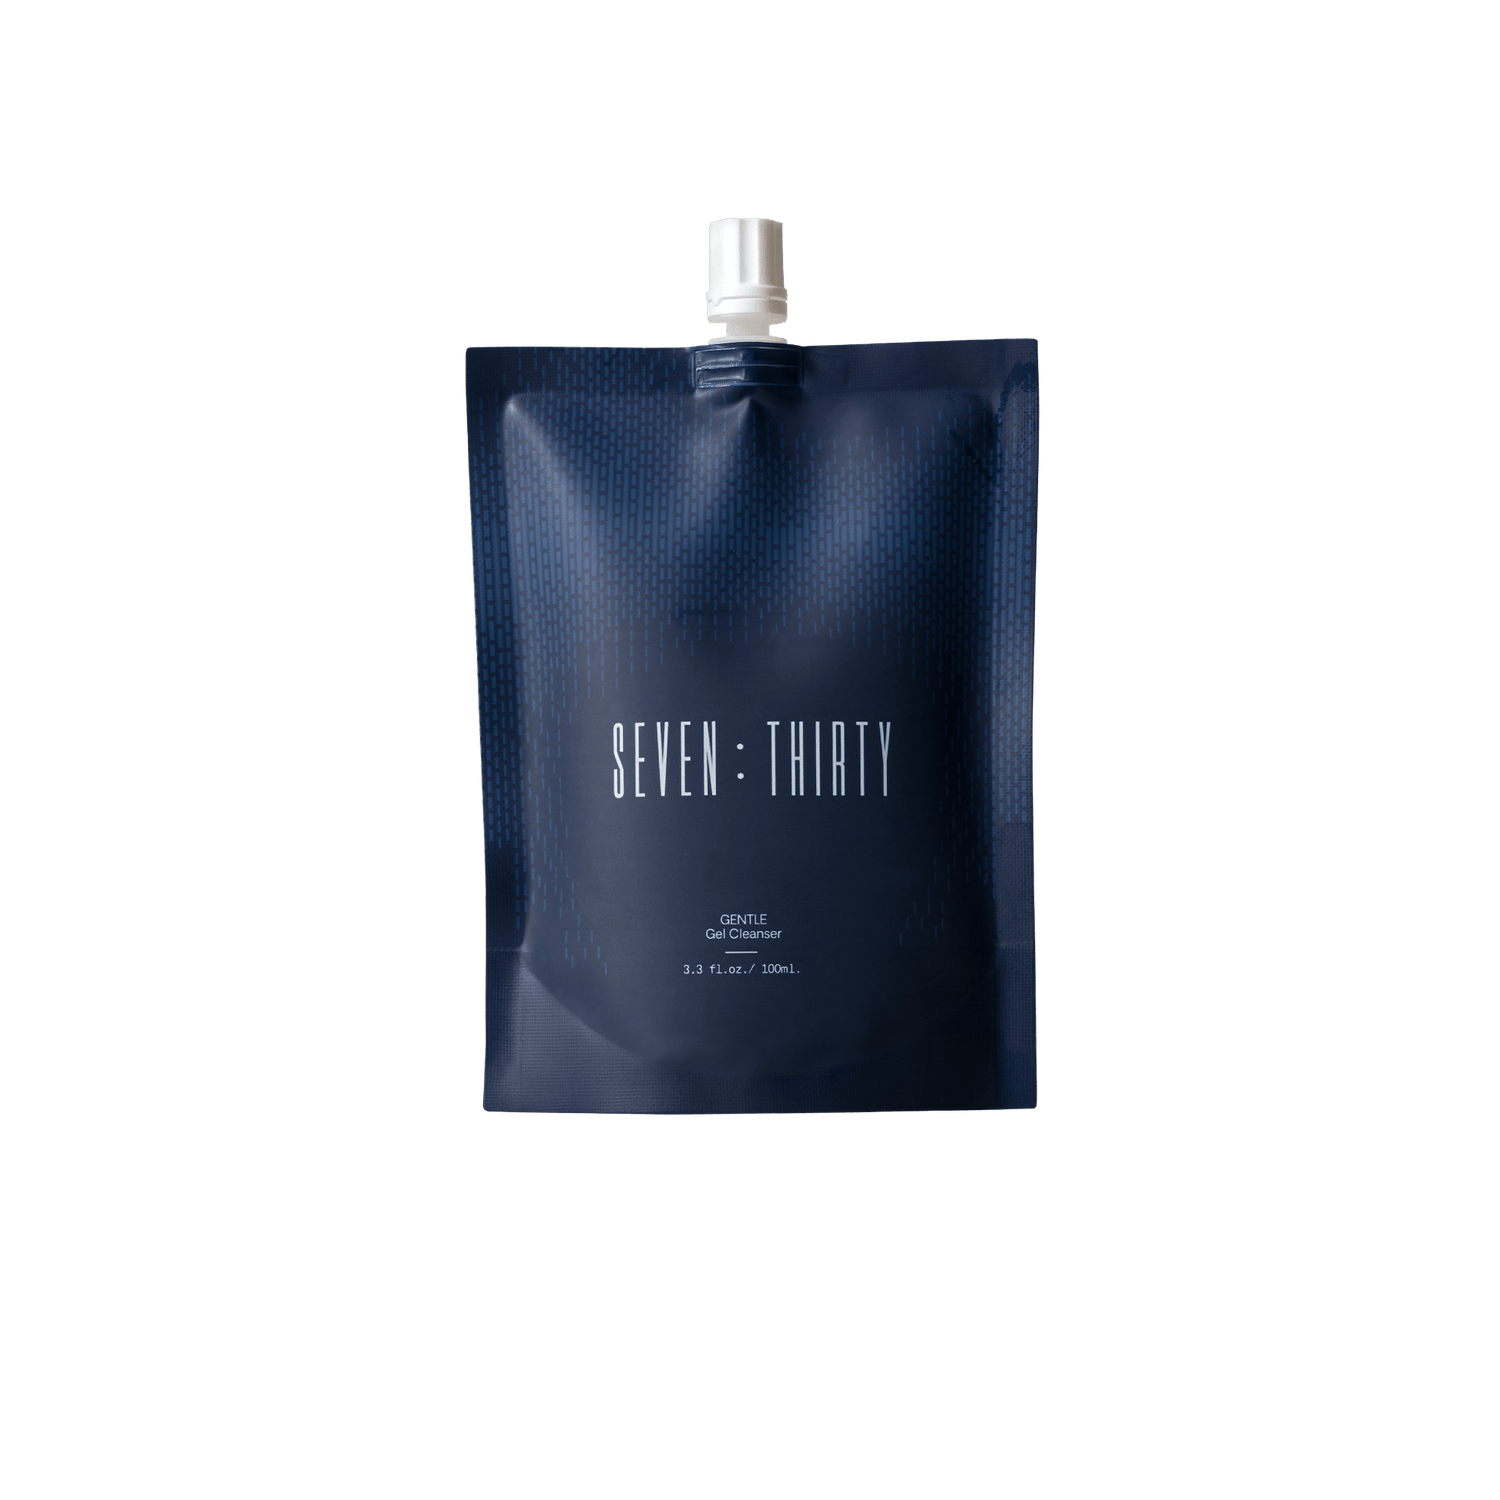 GENTLE Gel Cleanser in its nautical blue pouch on a white background